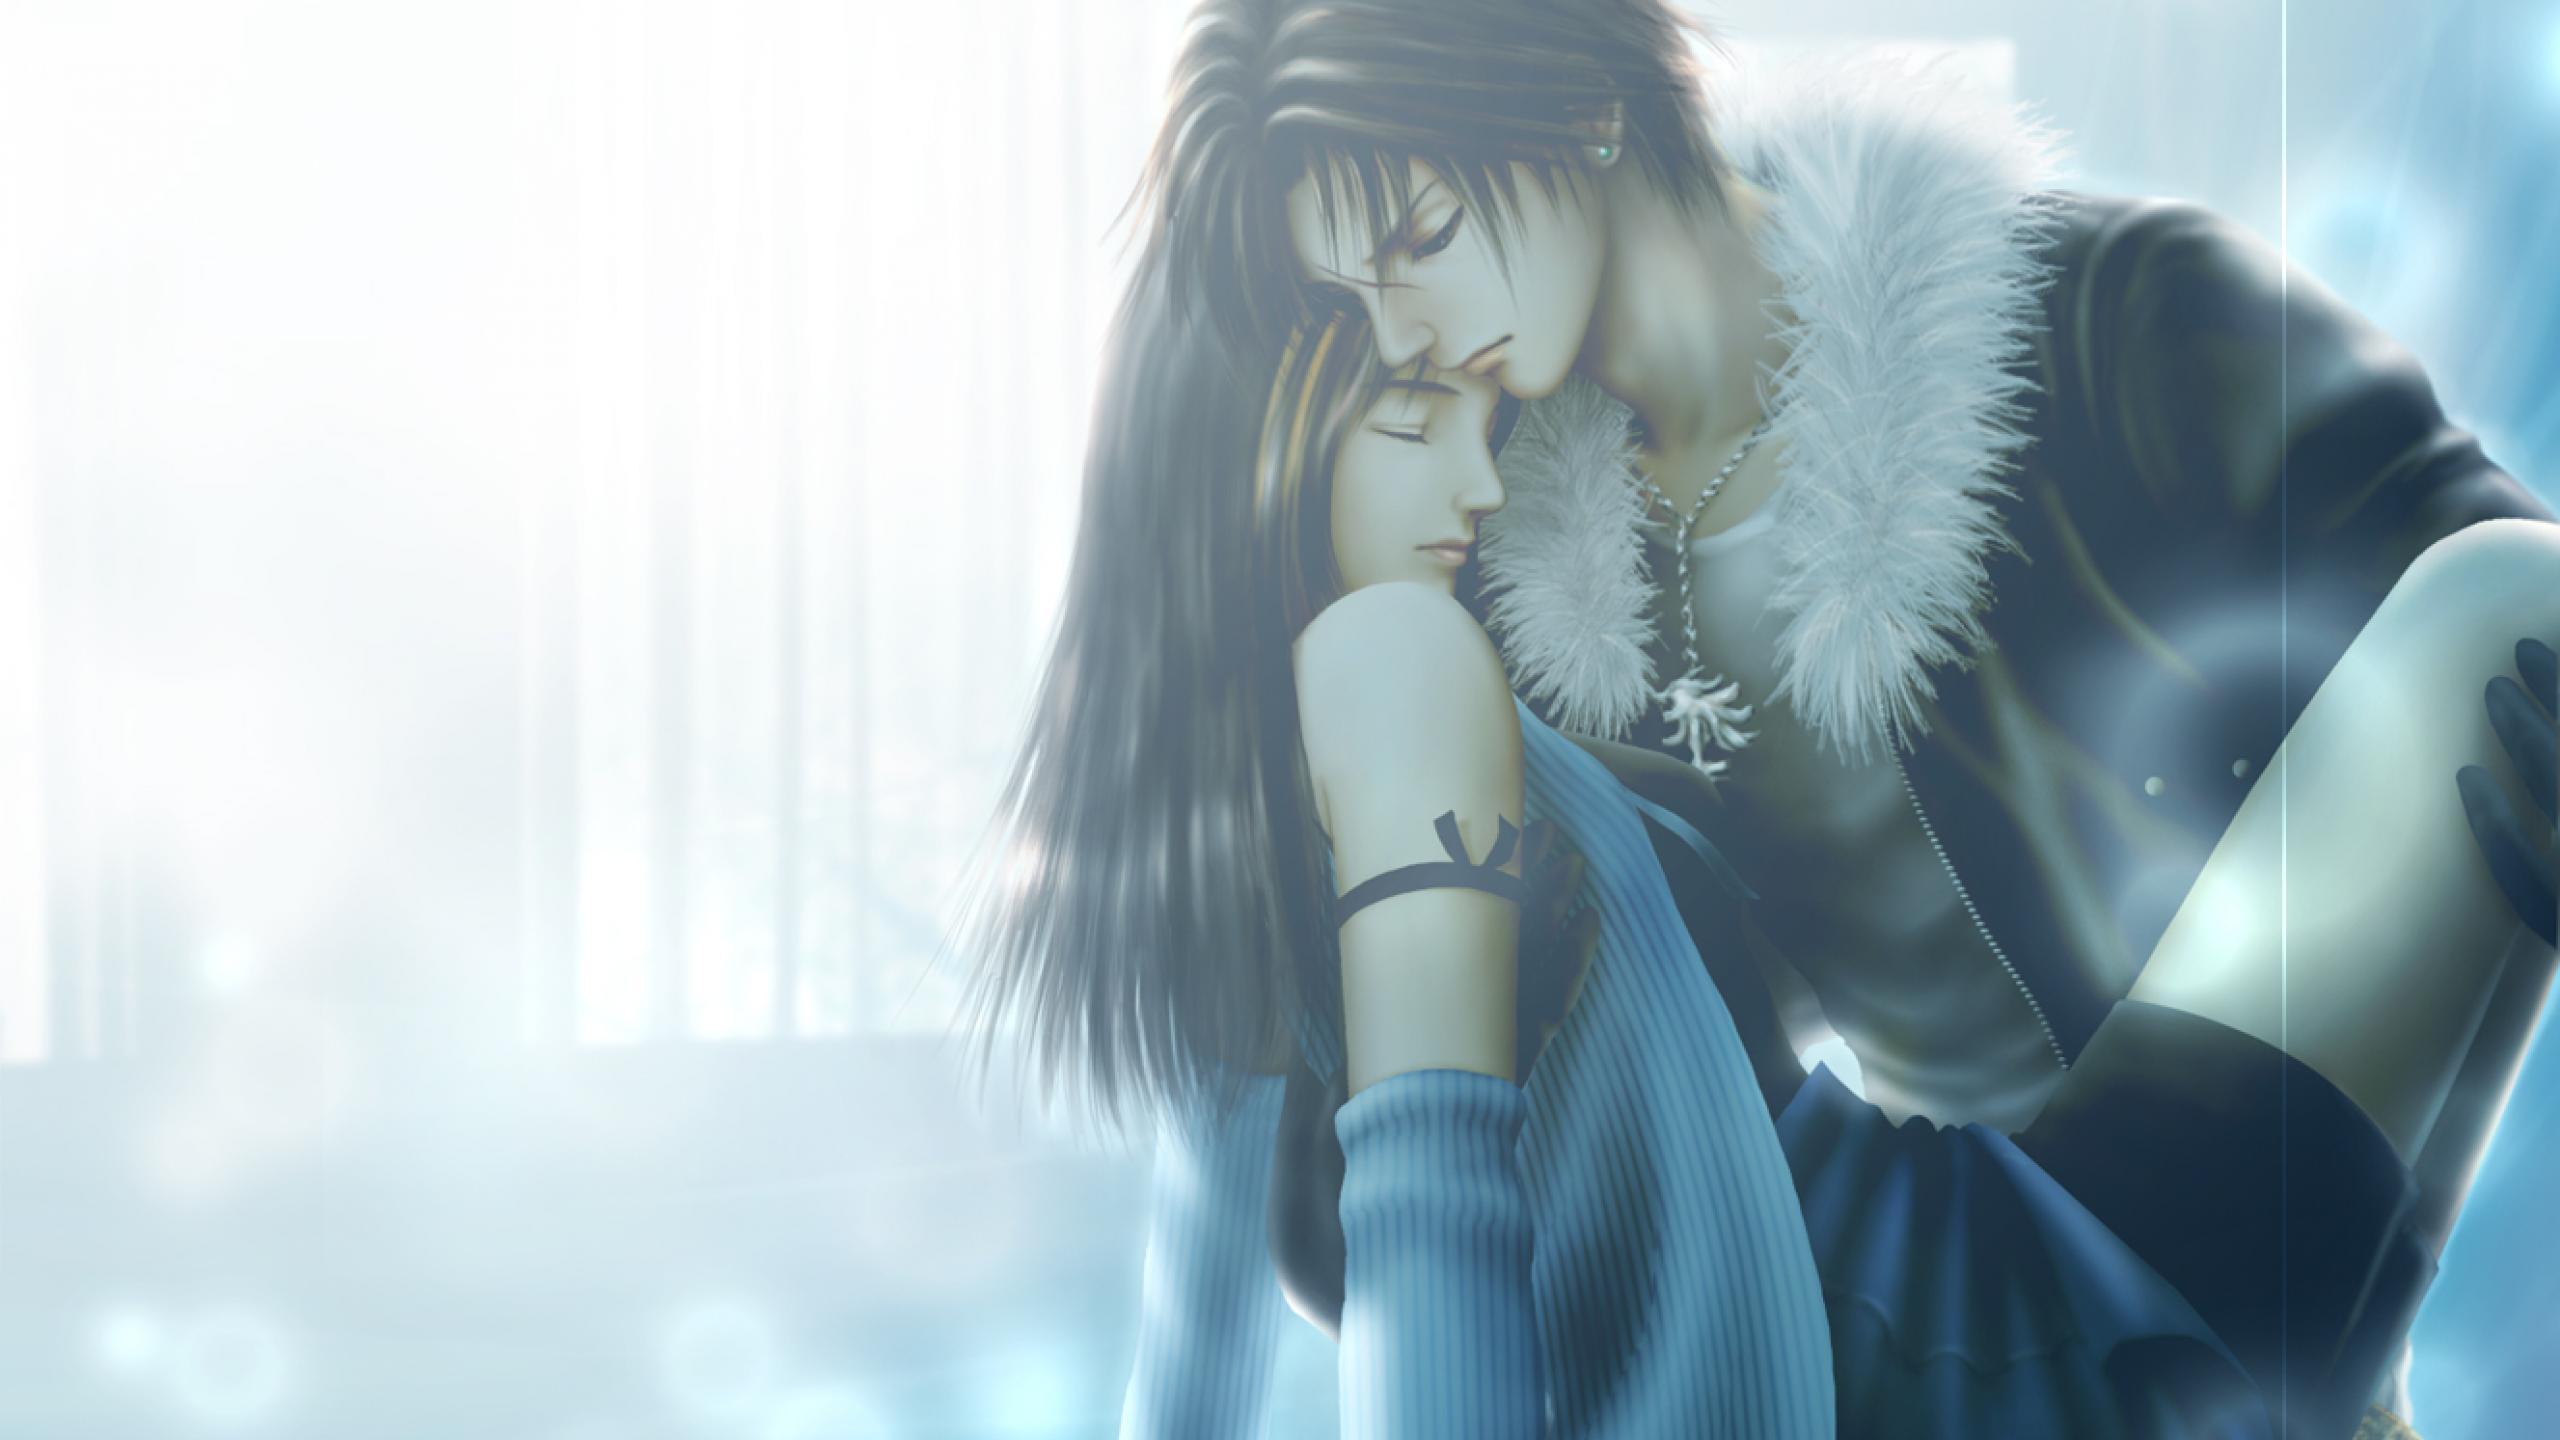 Ffviii, 4K wallpaper for your desktop or mobile screen free and easy to download